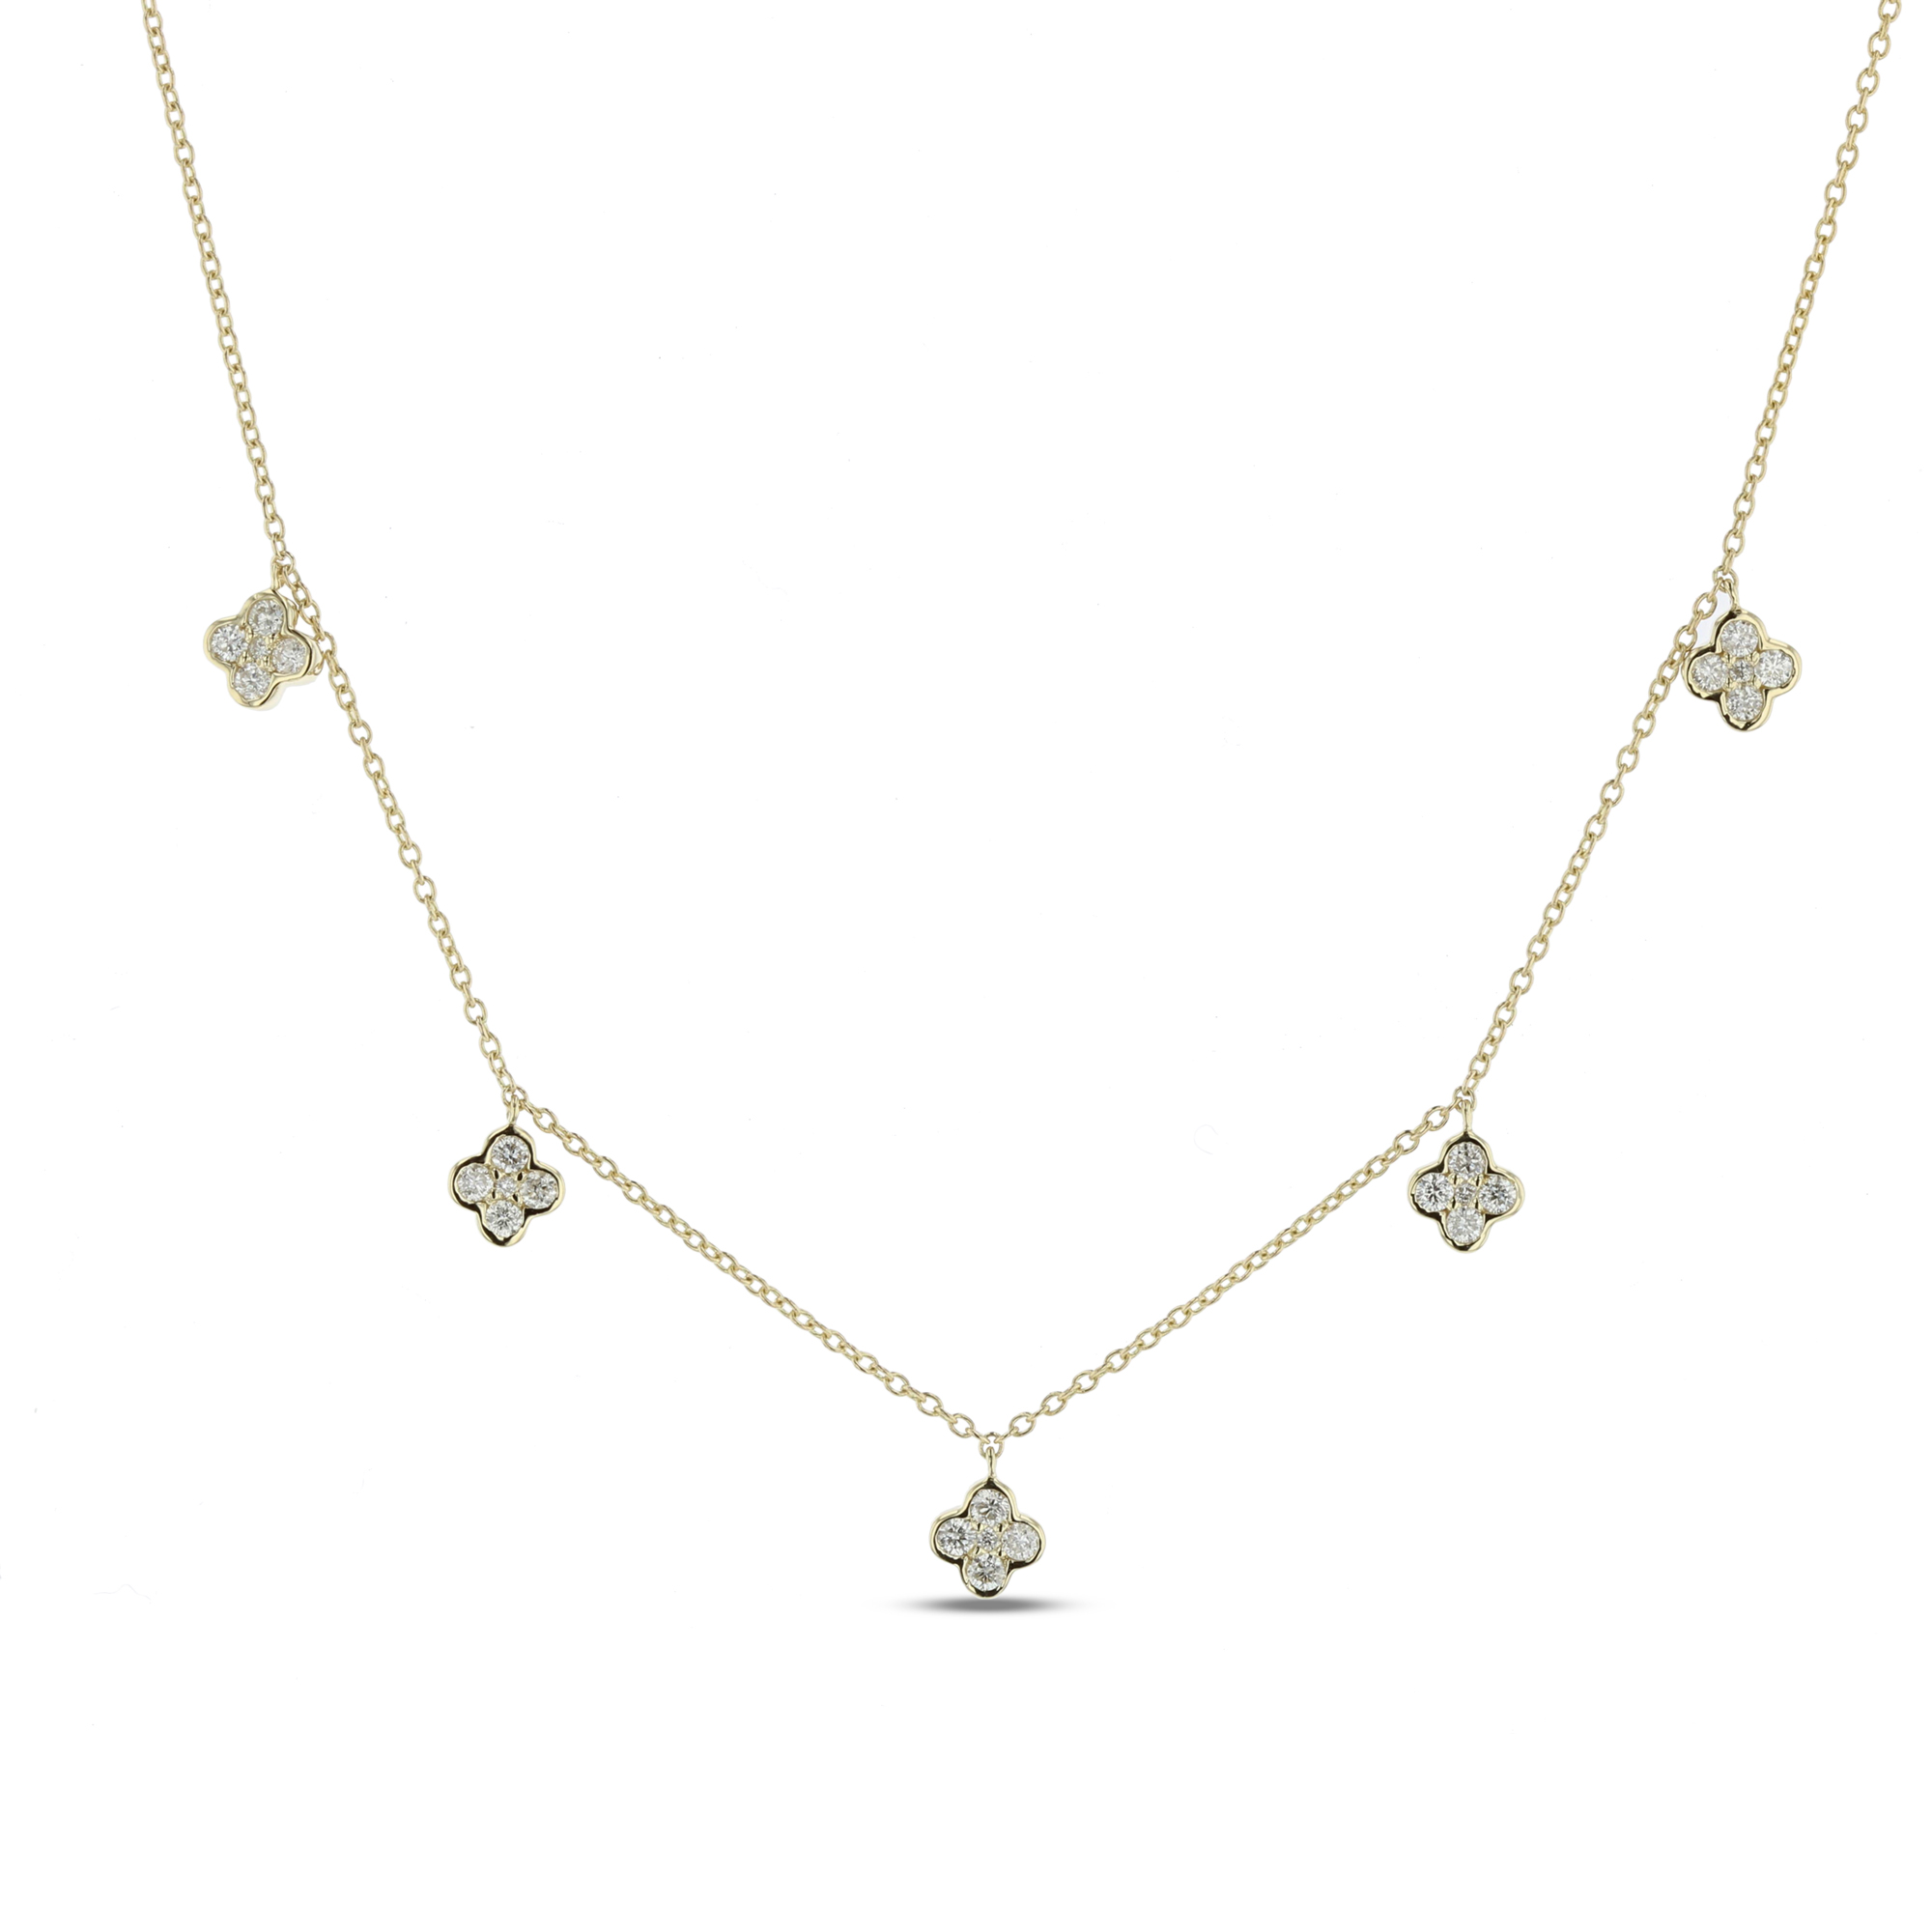 View 0.35ctw Diamond Cluster Clover Necklace in 14k Yellow Gold